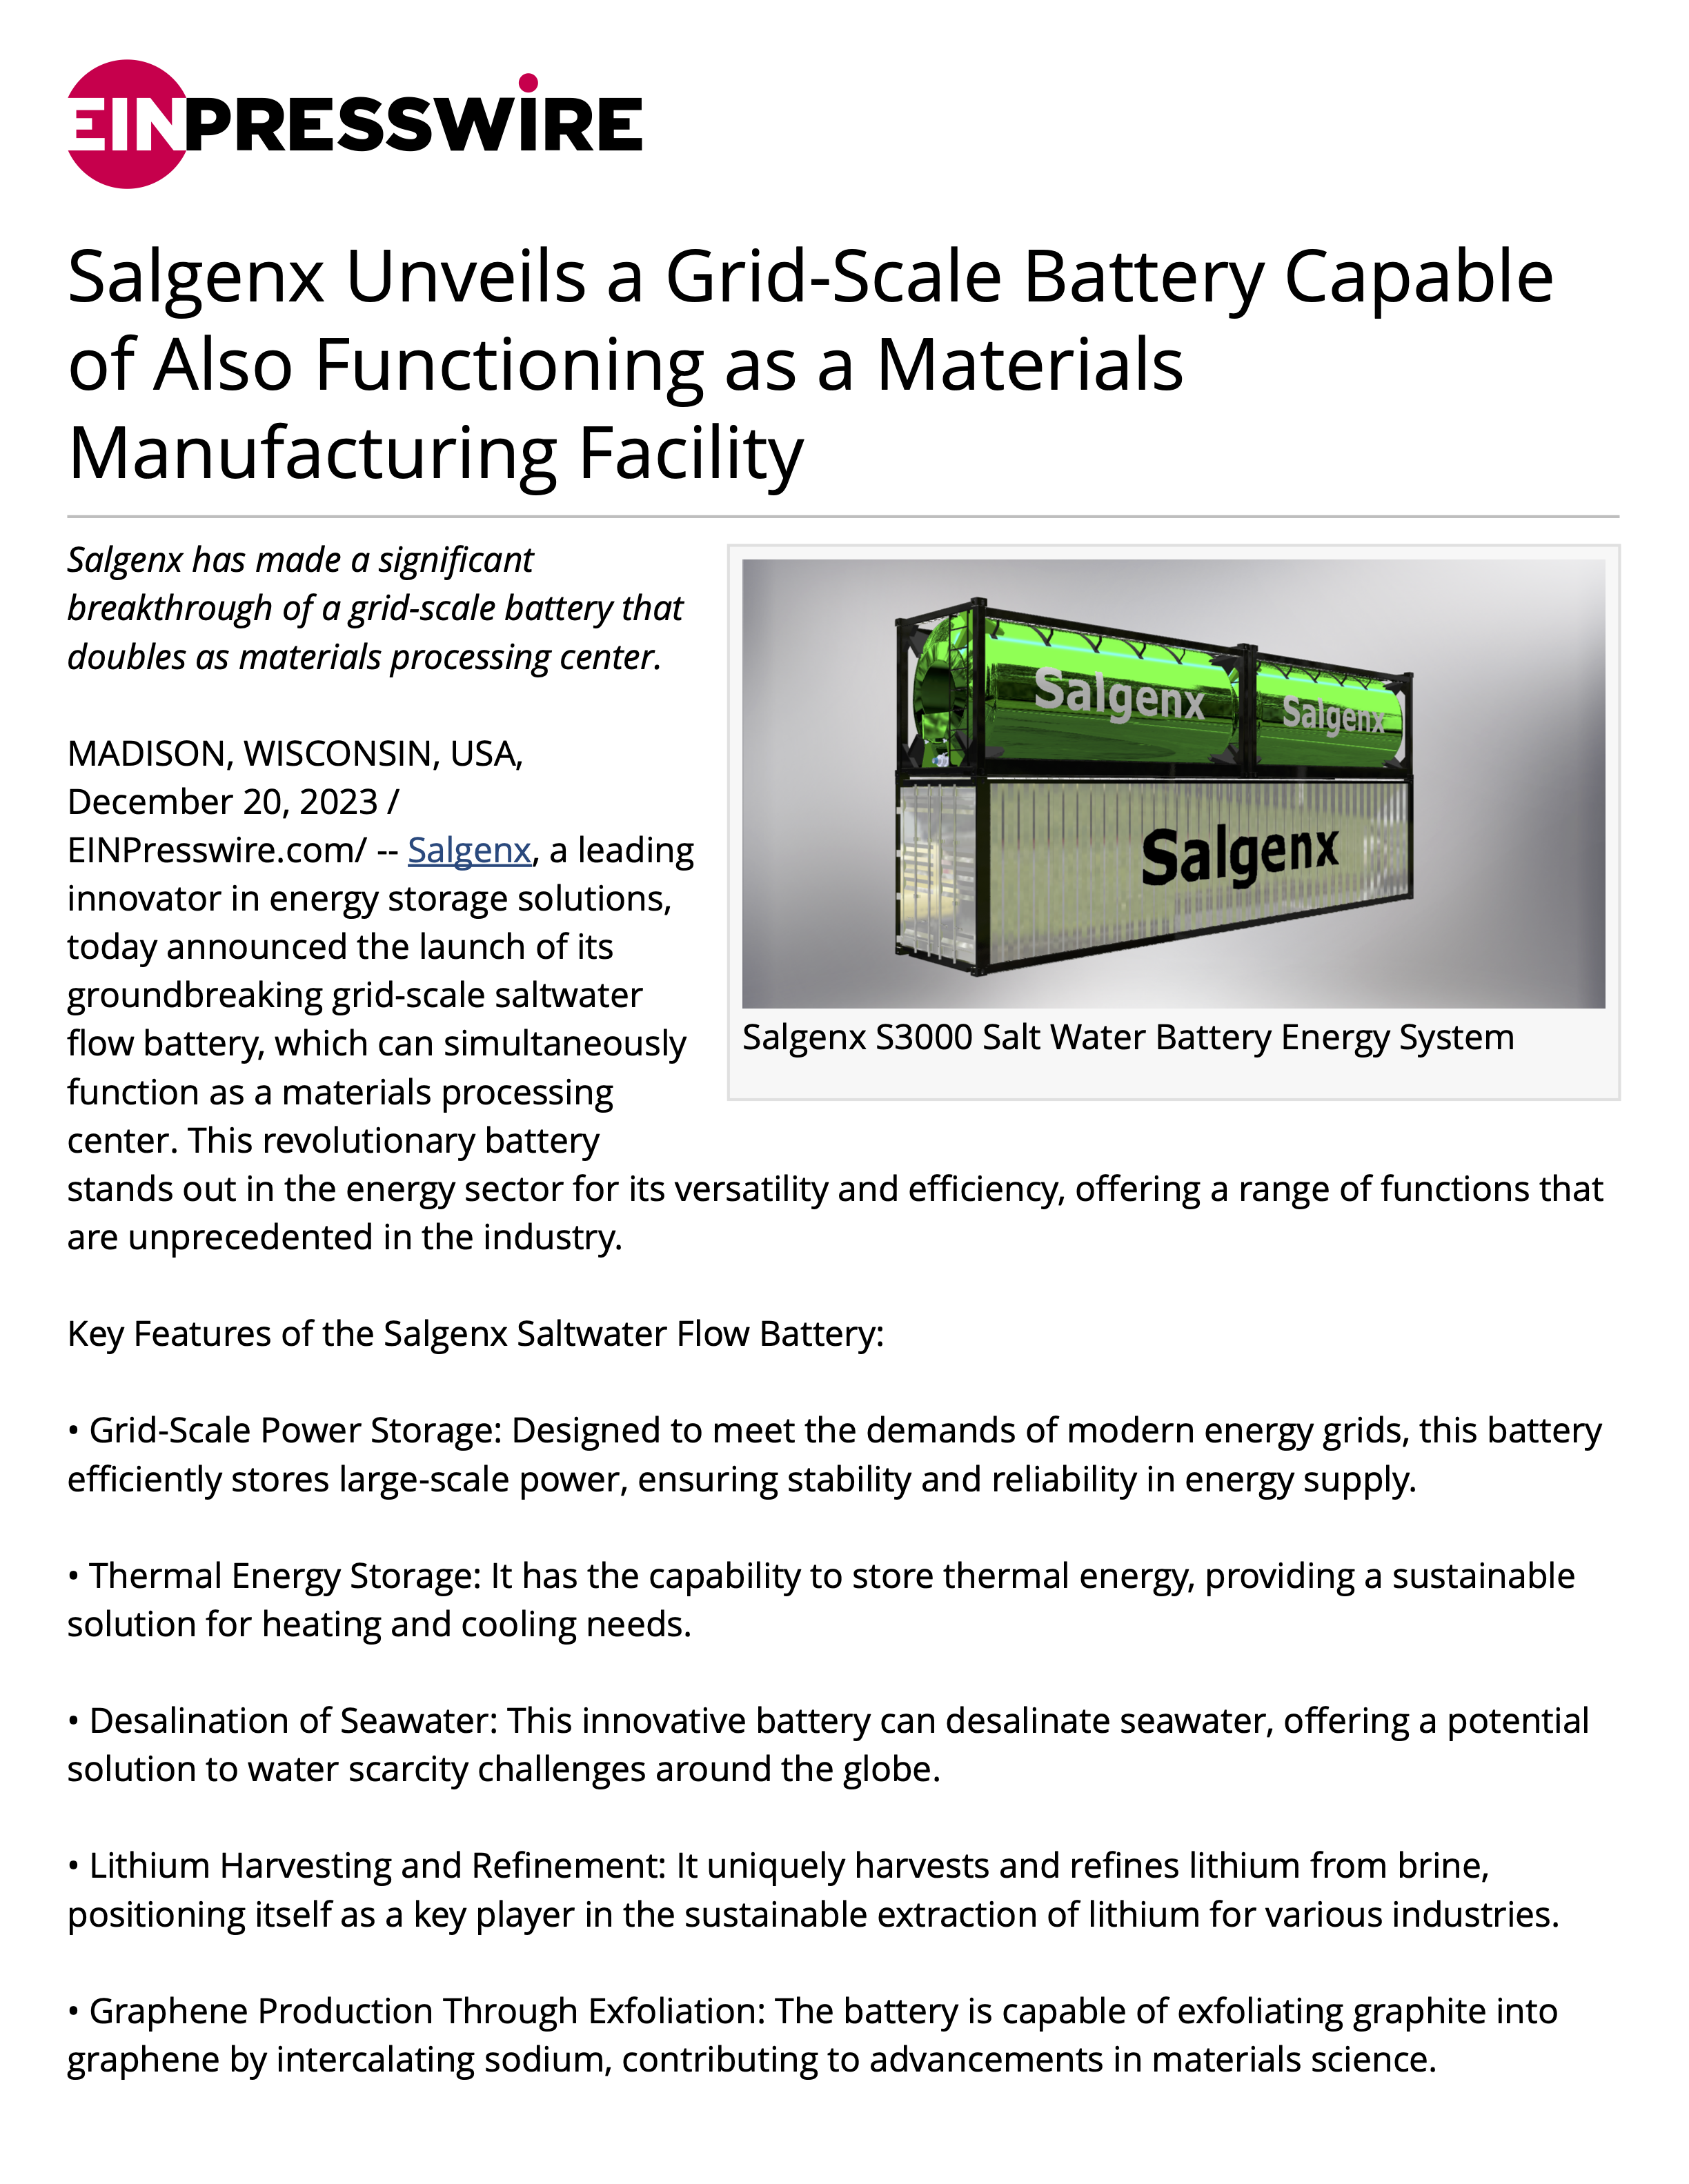 Salgenx Unveils a Grid-Scale Battery Capable of Also Functioning as a Materials Manufacturing Facility